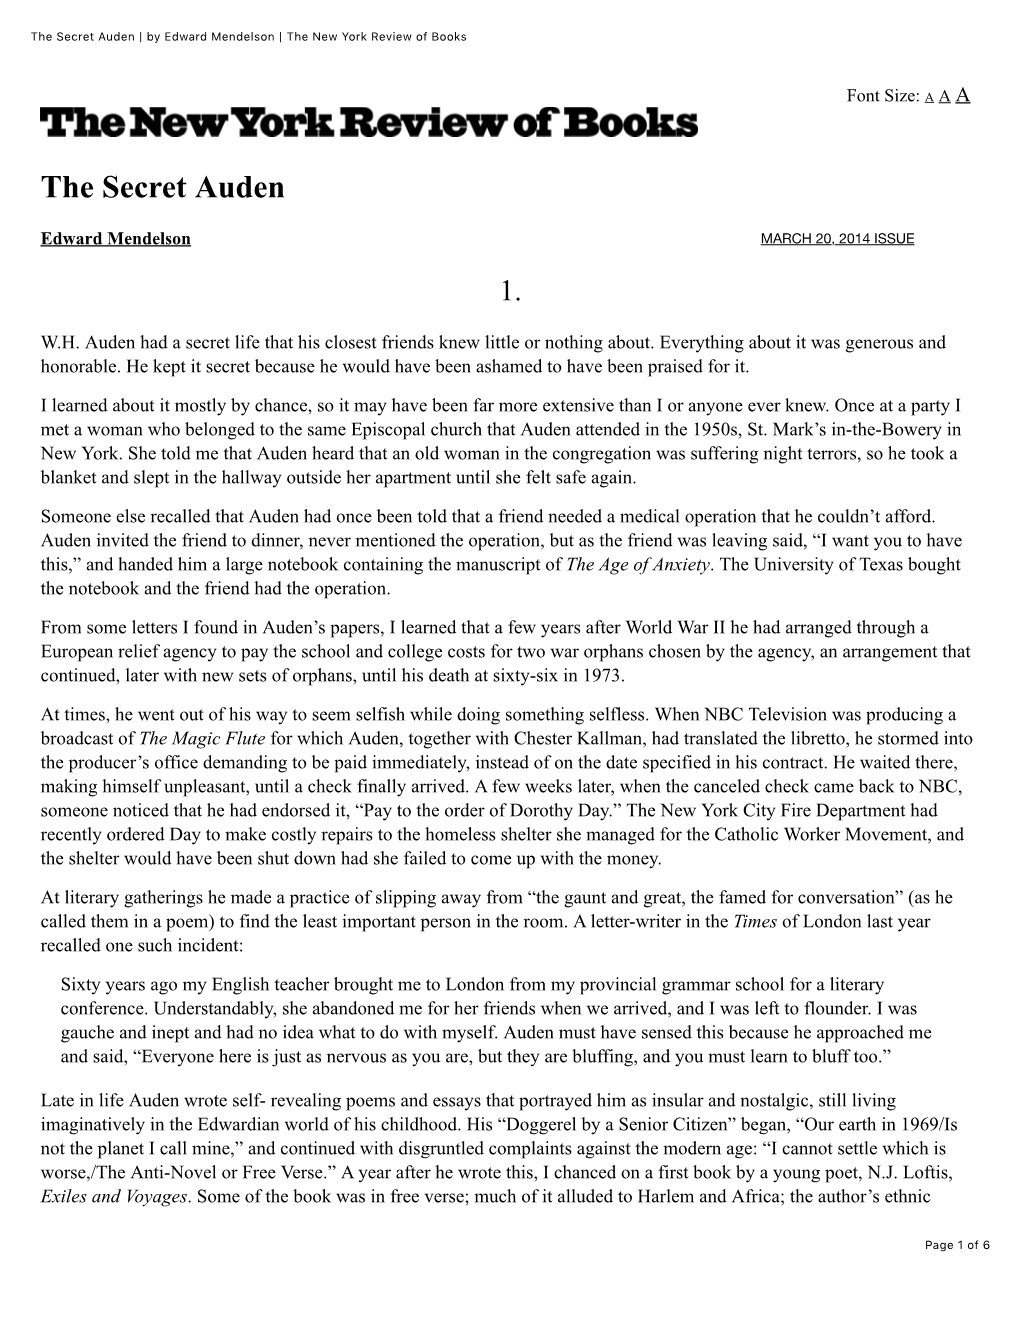 The Secret Auden | by Edward Mendelson | the New York Review of Books